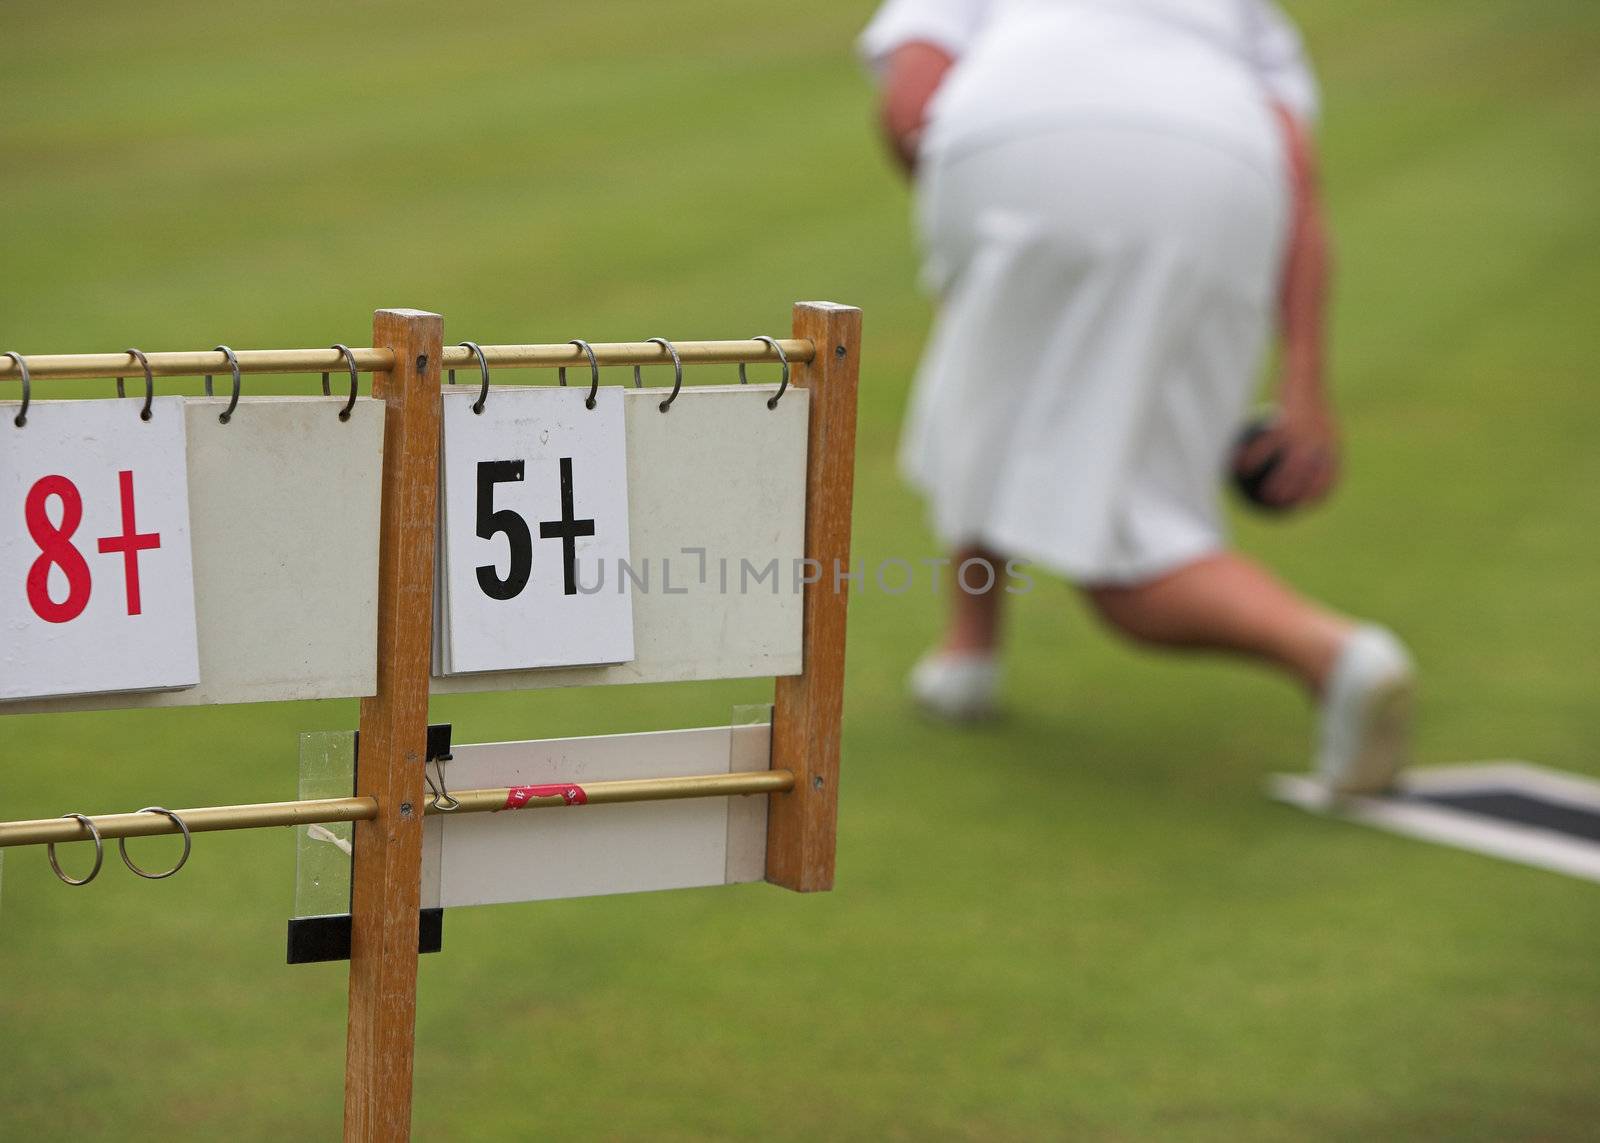 A lady playing lawn bowls and the scoreboard.